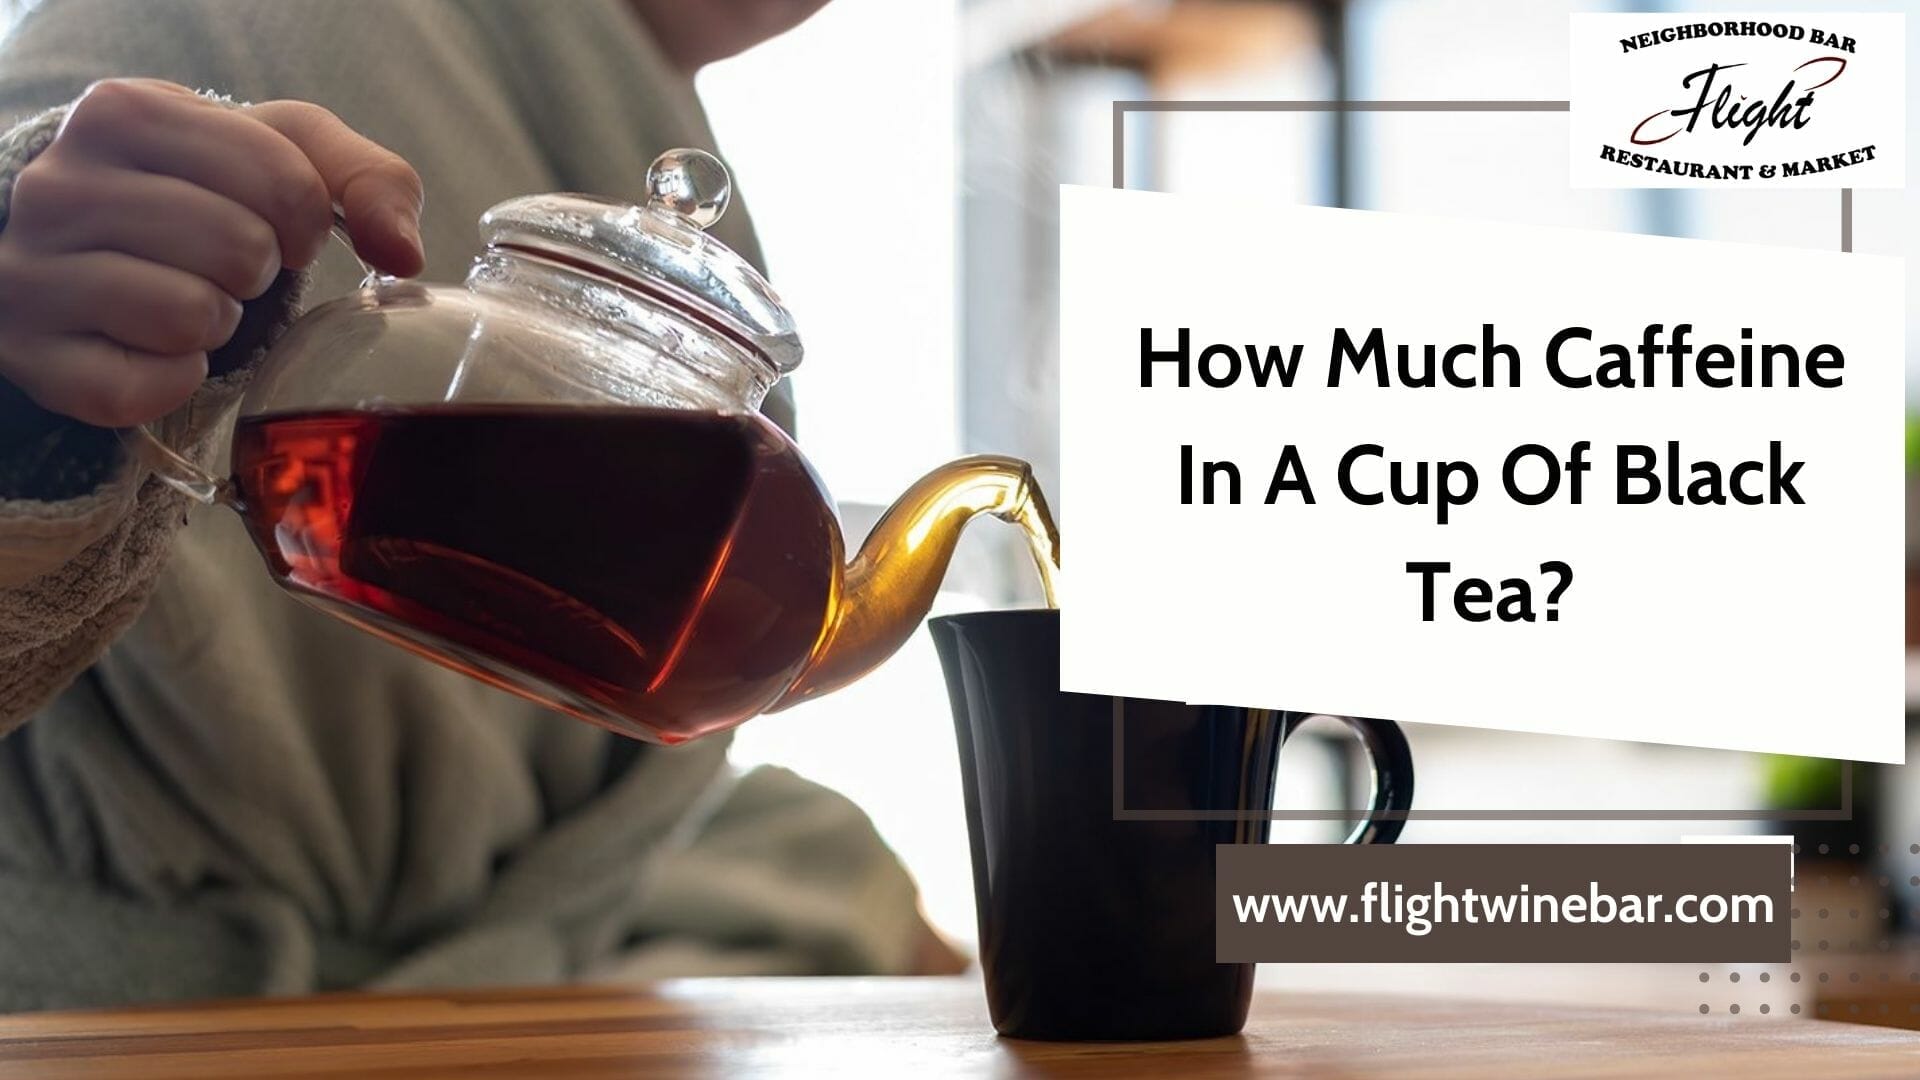 How Much Caffeine In A Cup Of Black Tea